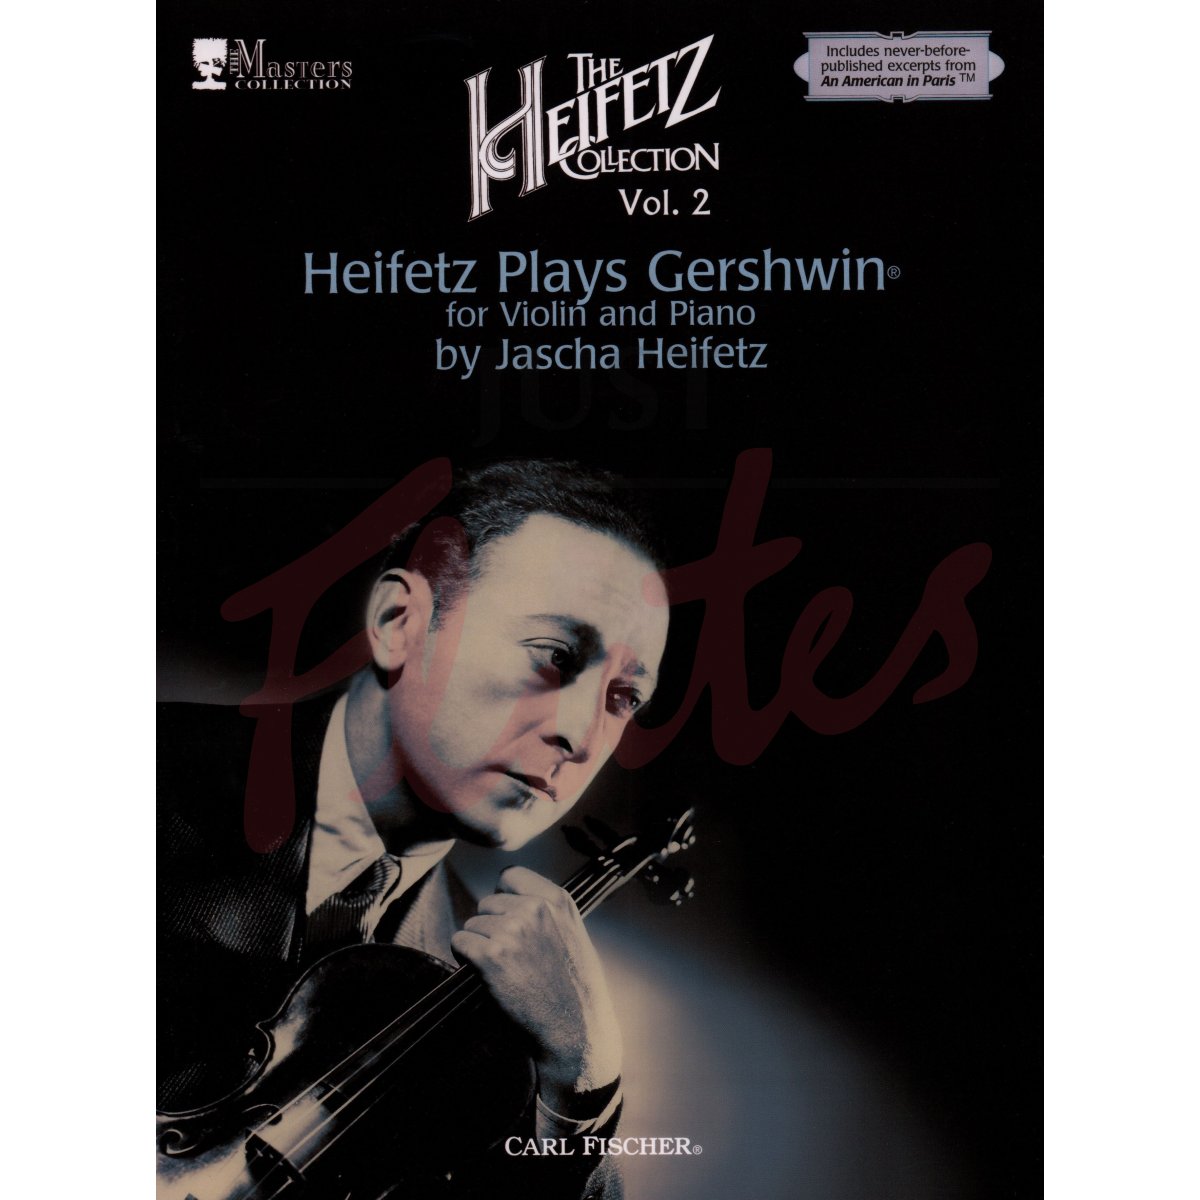 Heifetz Plays Gershwin for Violin and Piano